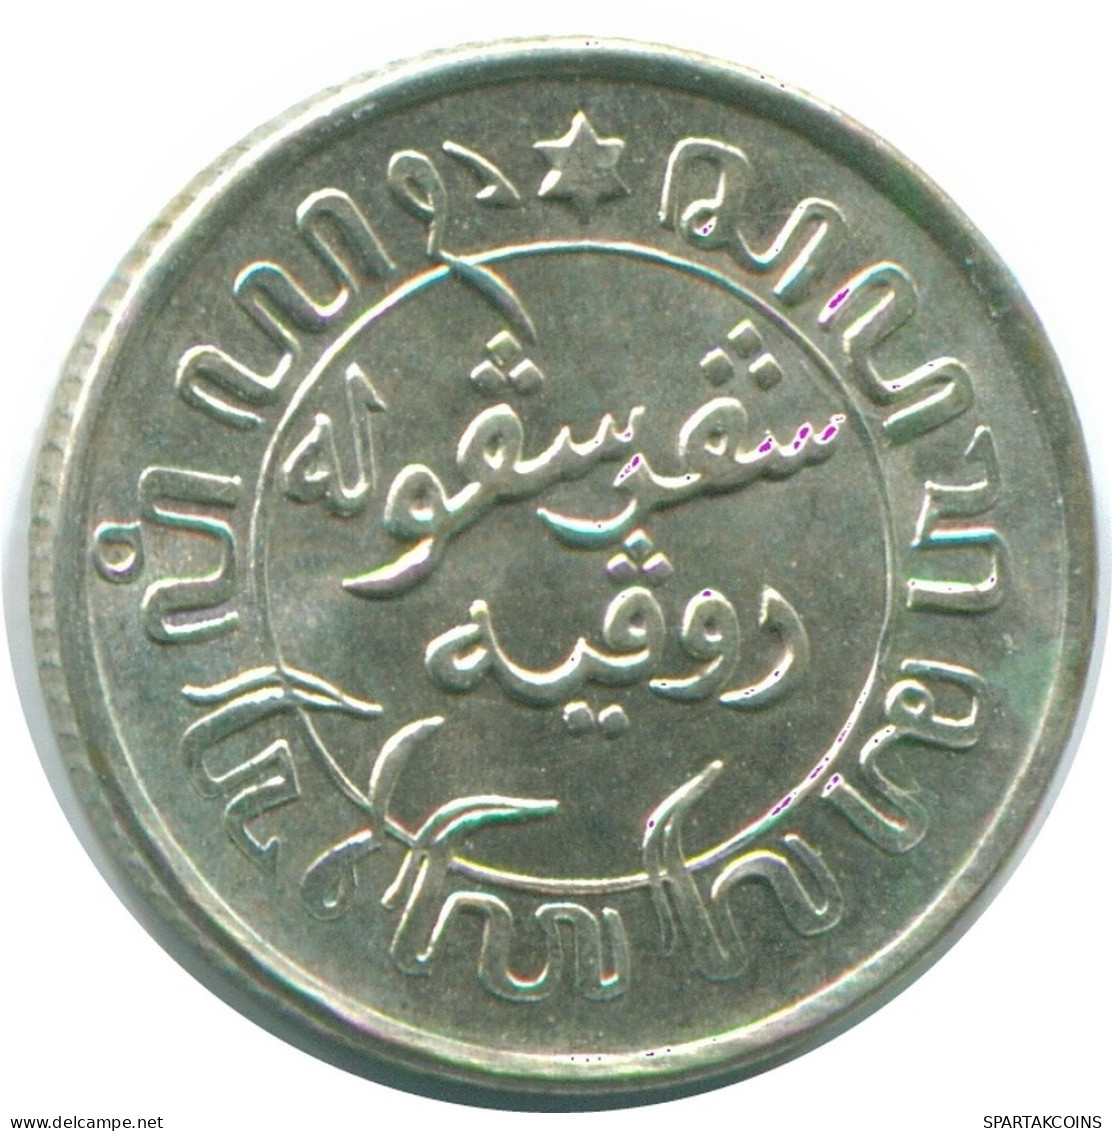 1/10 GULDEN 1941 S NETHERLANDS EAST INDIES SILVER Colonial Coin #NL13556.3.U.A - Dutch East Indies